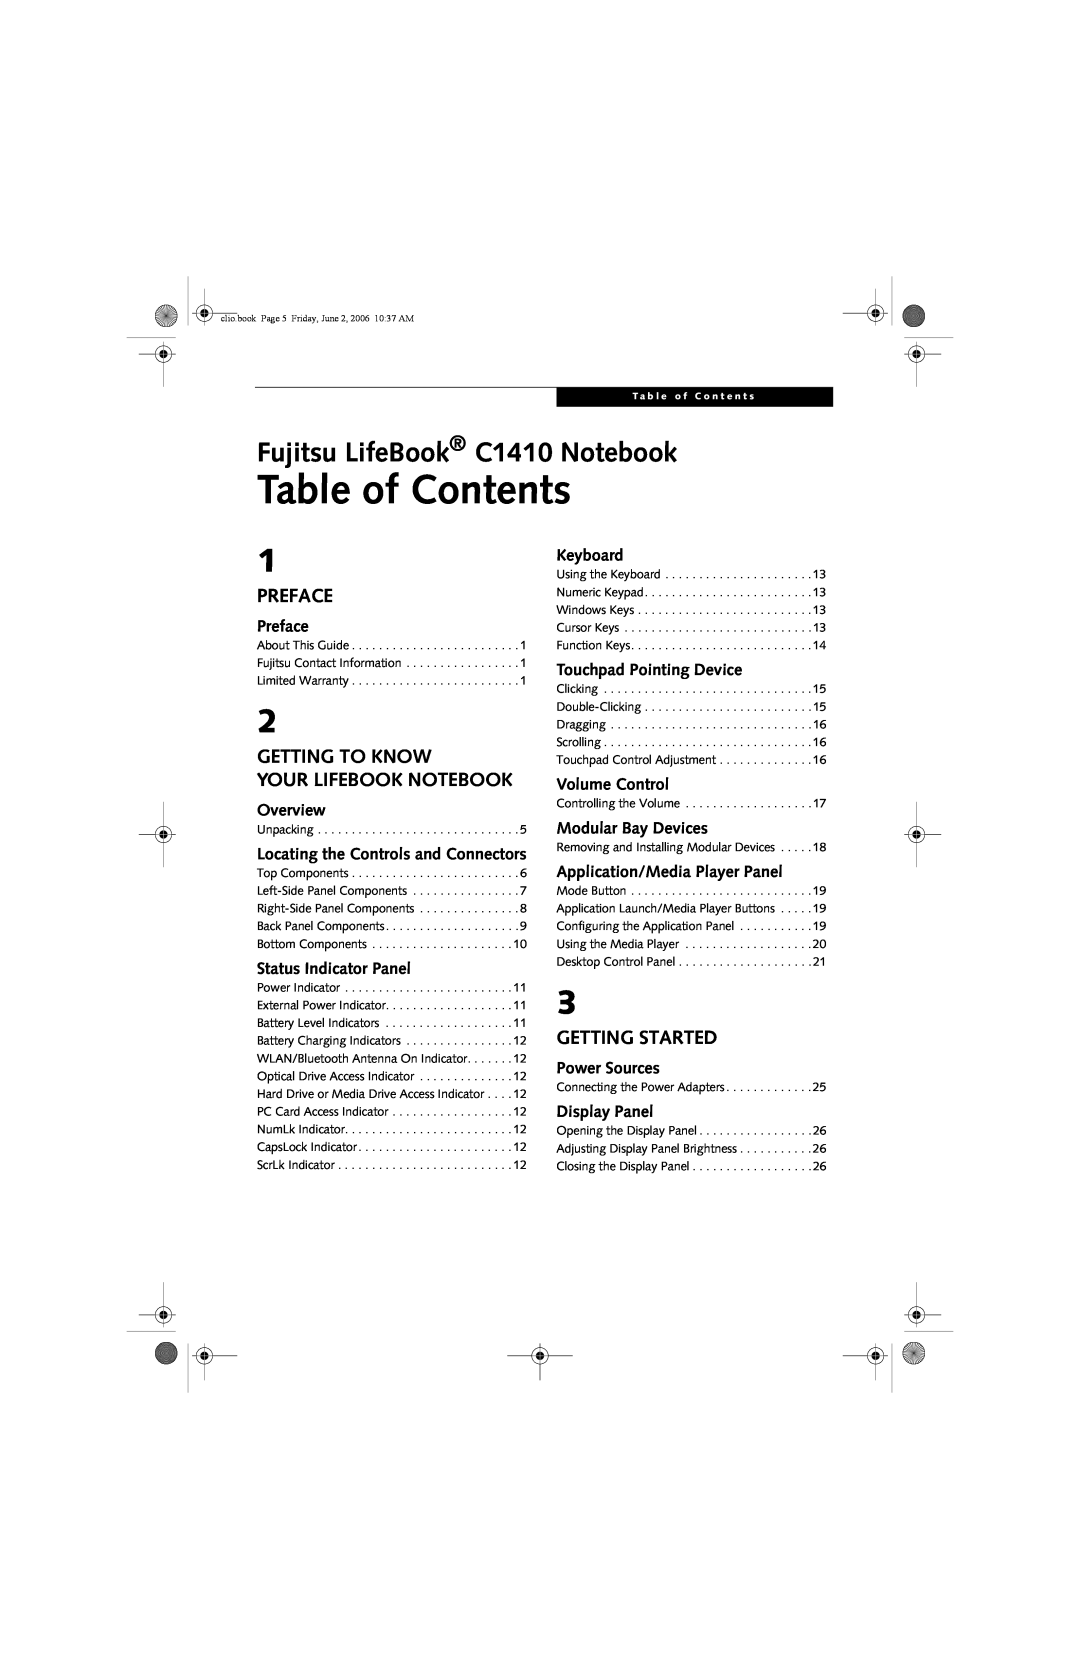 Fujitsu C1410 manual Table of Contents, Preface, Getting To Know Your Lifebook Notebook, Getting Started 